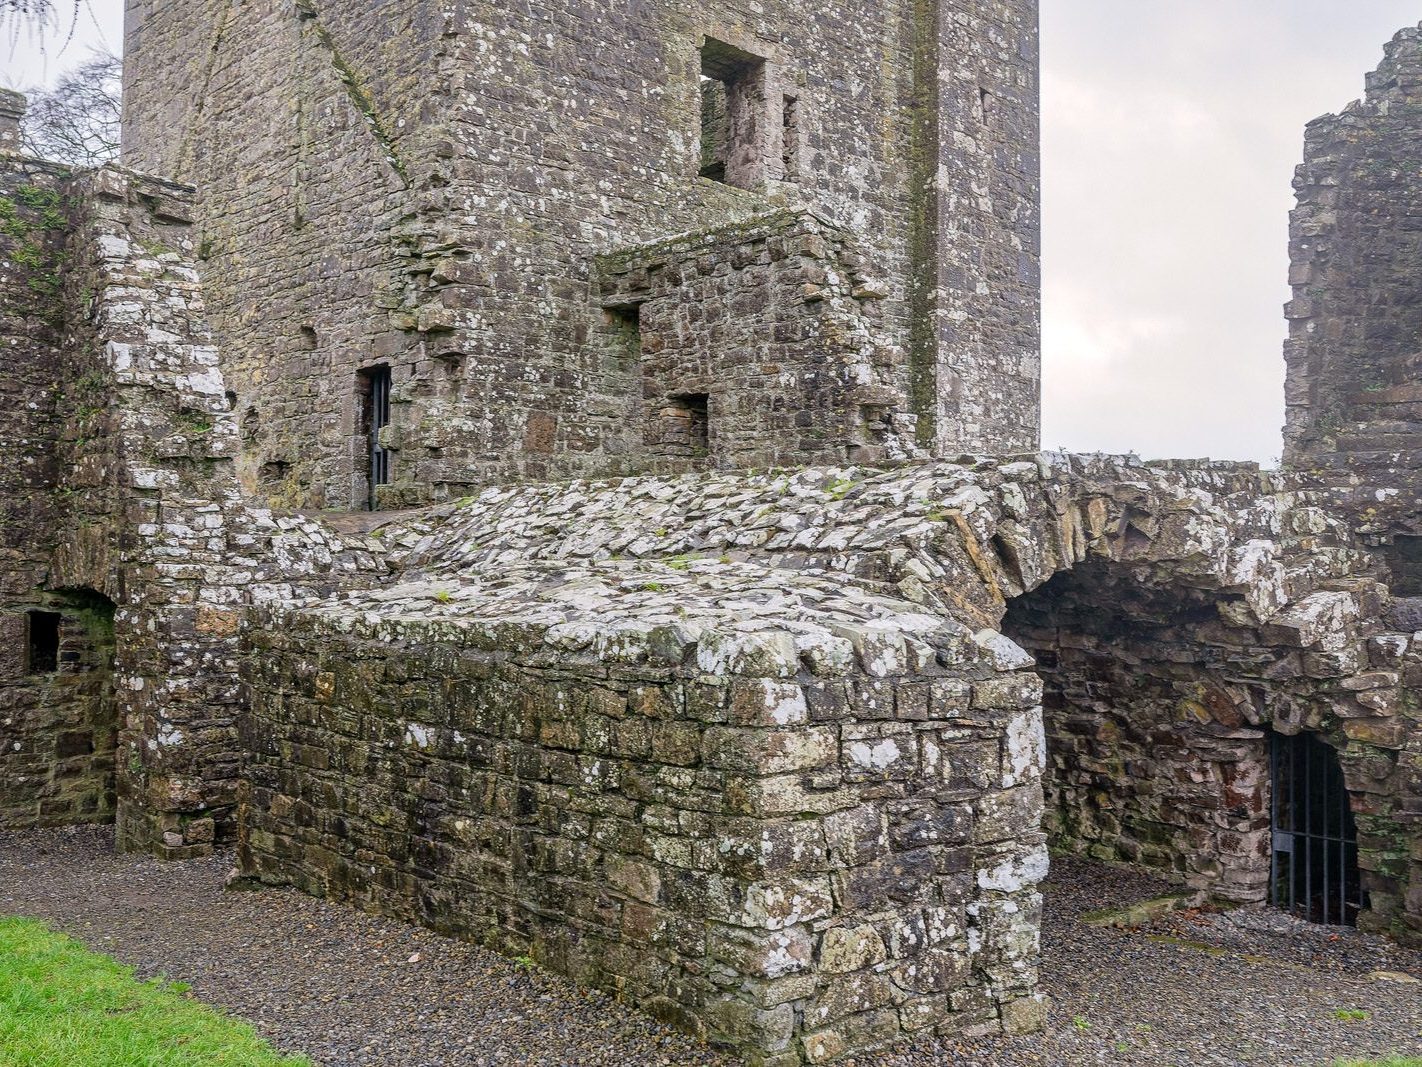 BECTIVE ABBEY WHICH I VISITED LAST CHRISTMAS [THERE WERE NO OTHER VISITORS AS IT WAS A VERY WET DAY]--225249-1